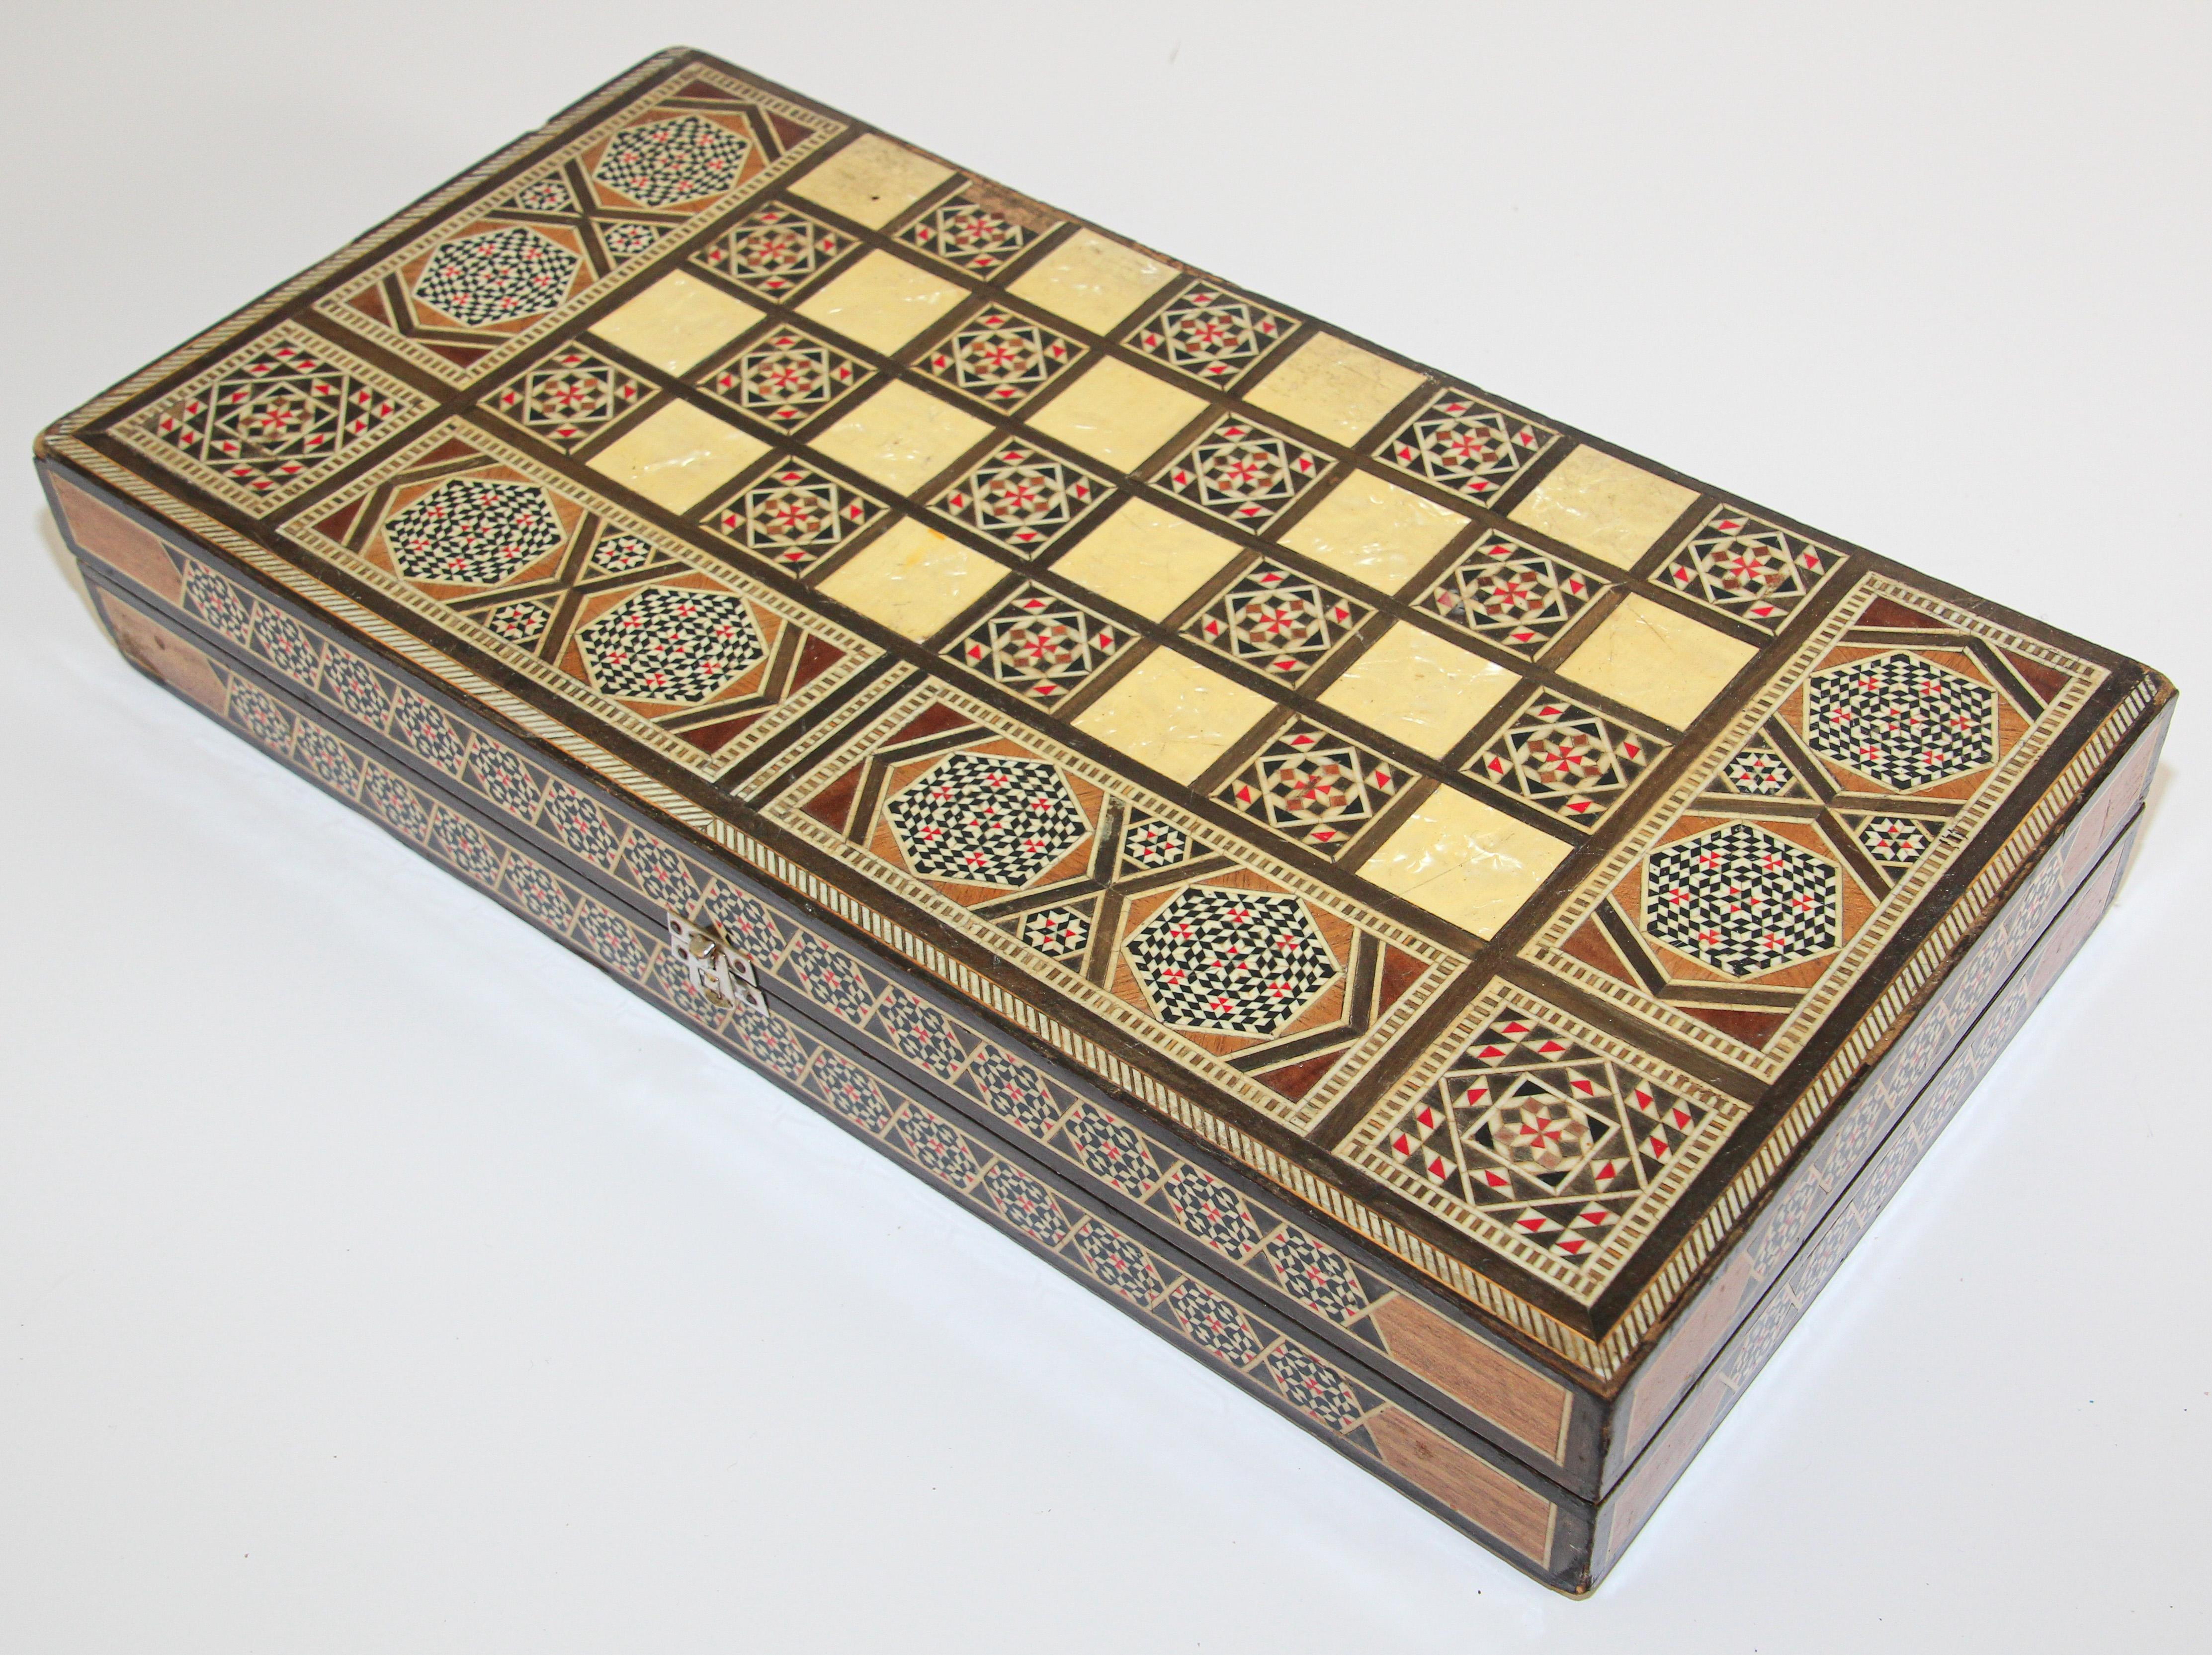 Moroccan Vintage Midcentury Folding Mosaic Inlaid Box with Backgammon Game